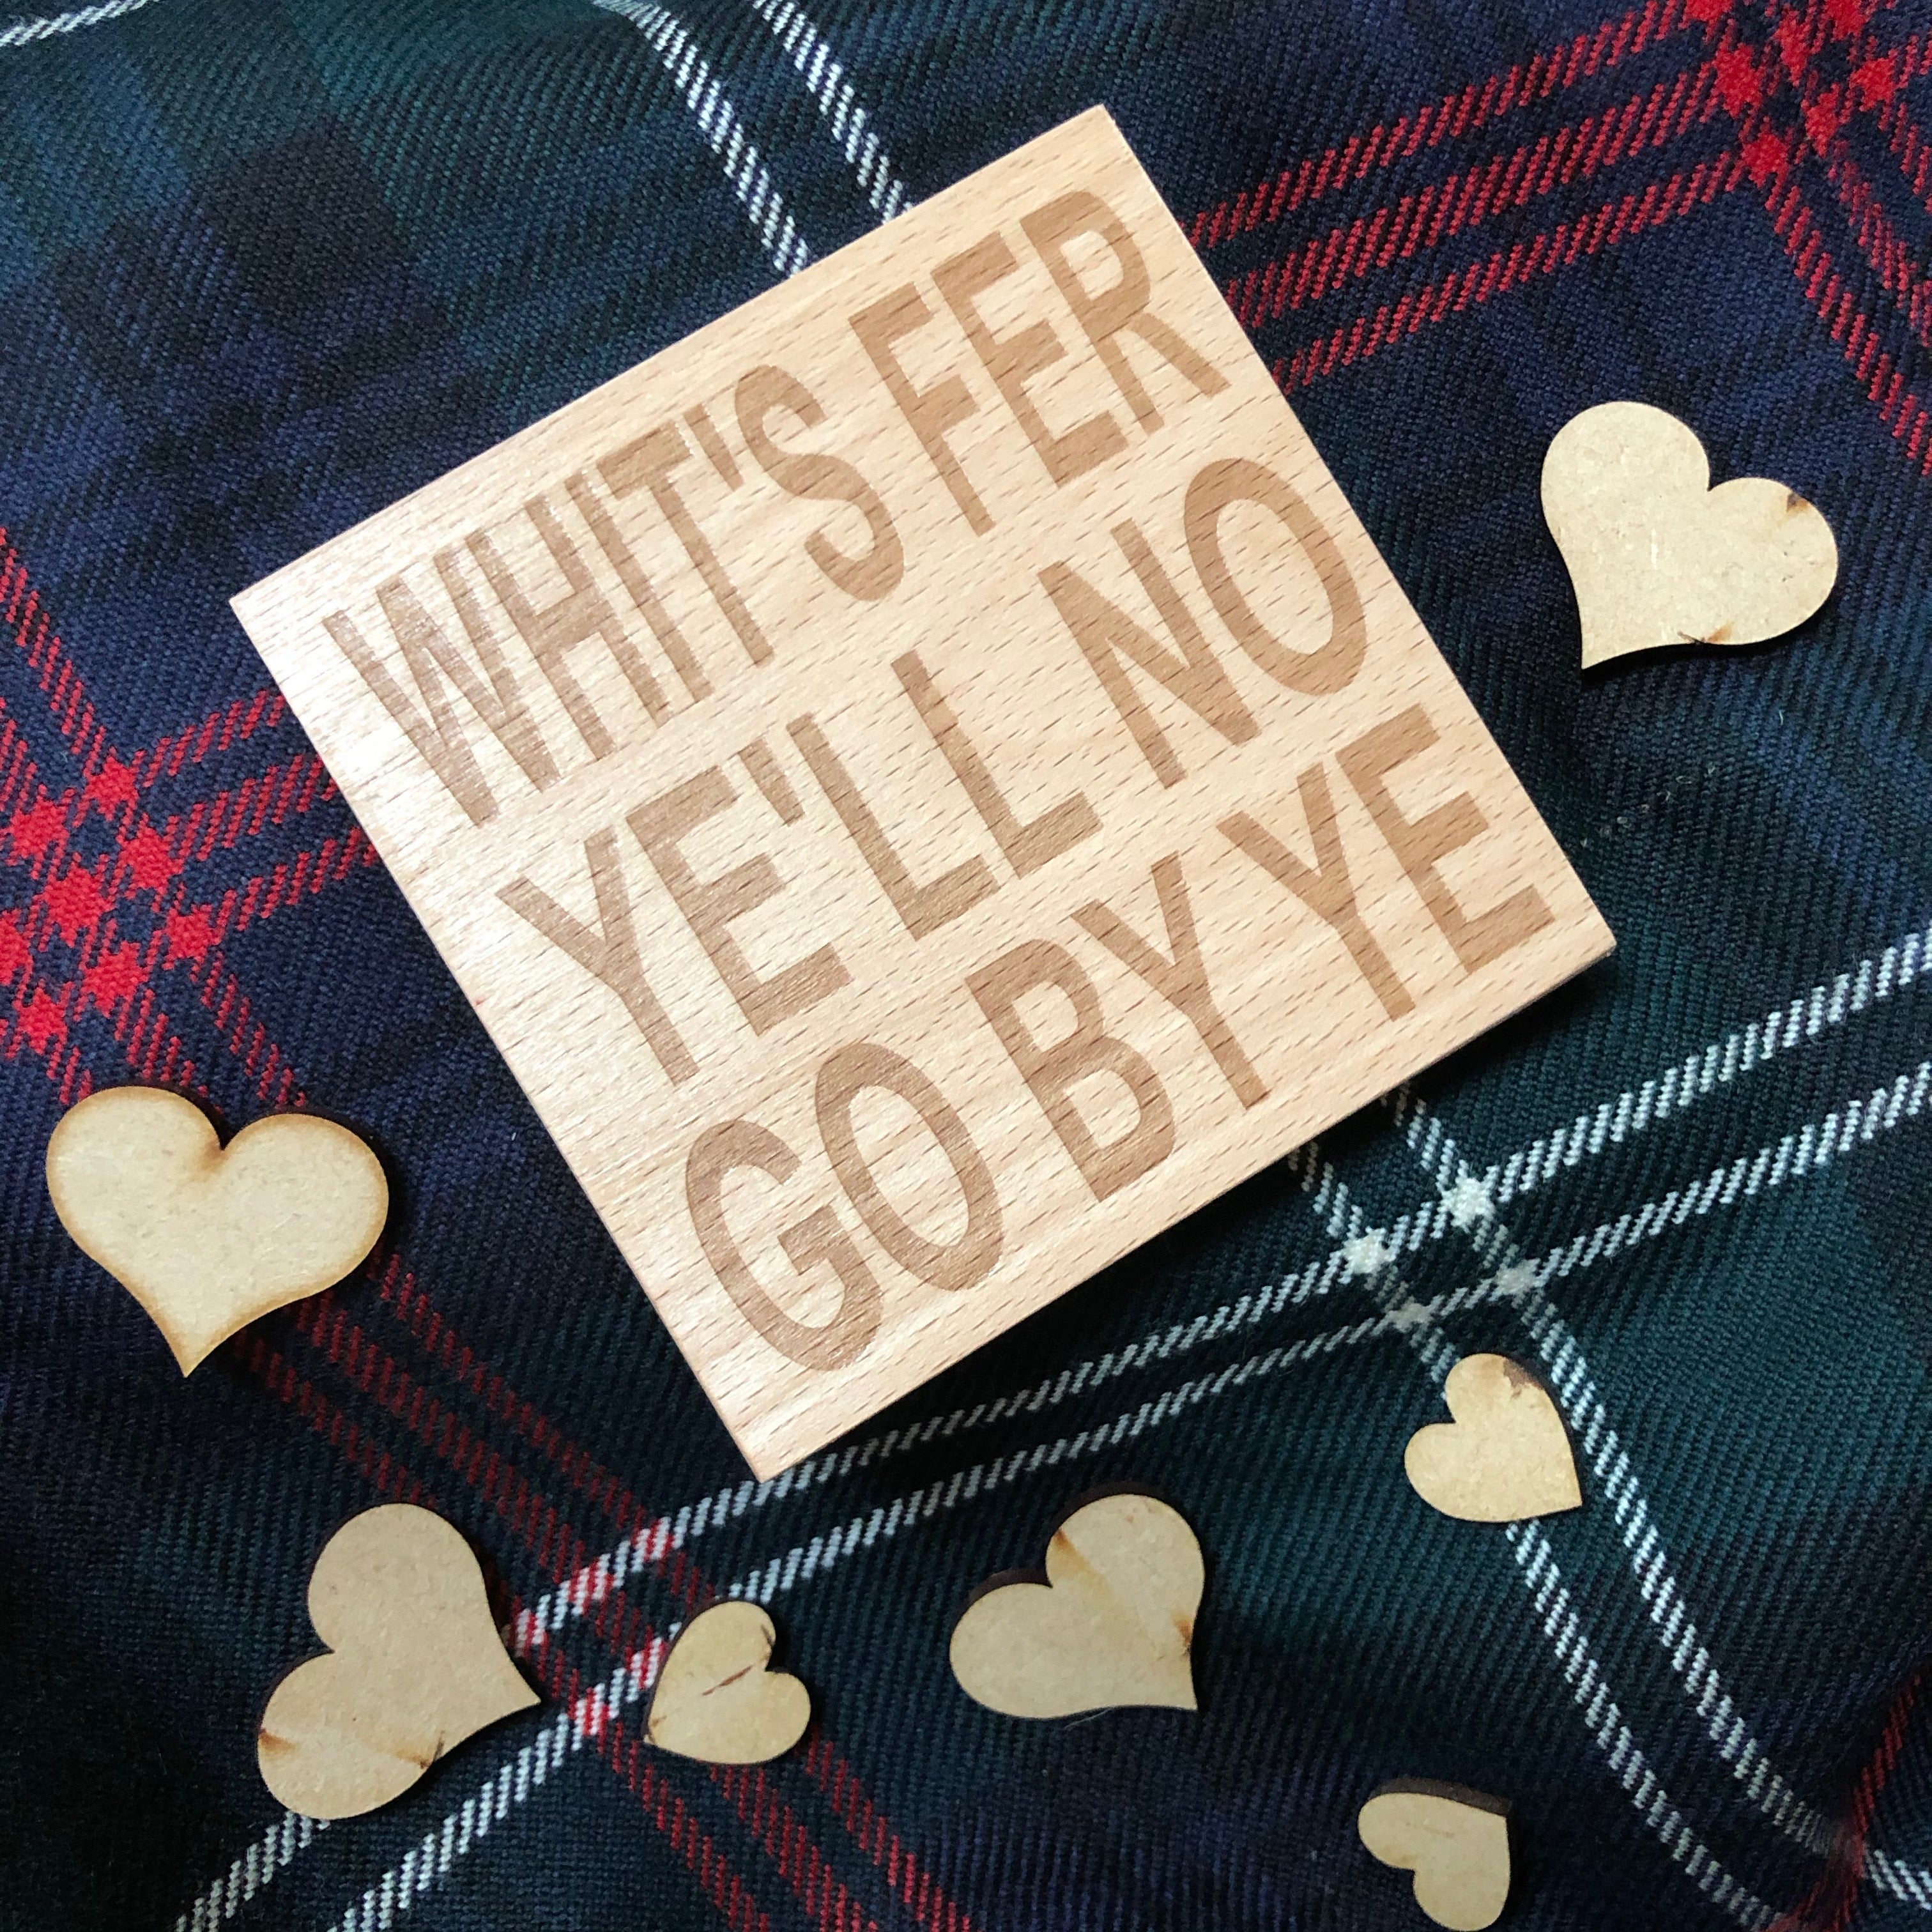 WoodWooden coaster gift - Scottish dialect - whit's fer ye'll no go by ye